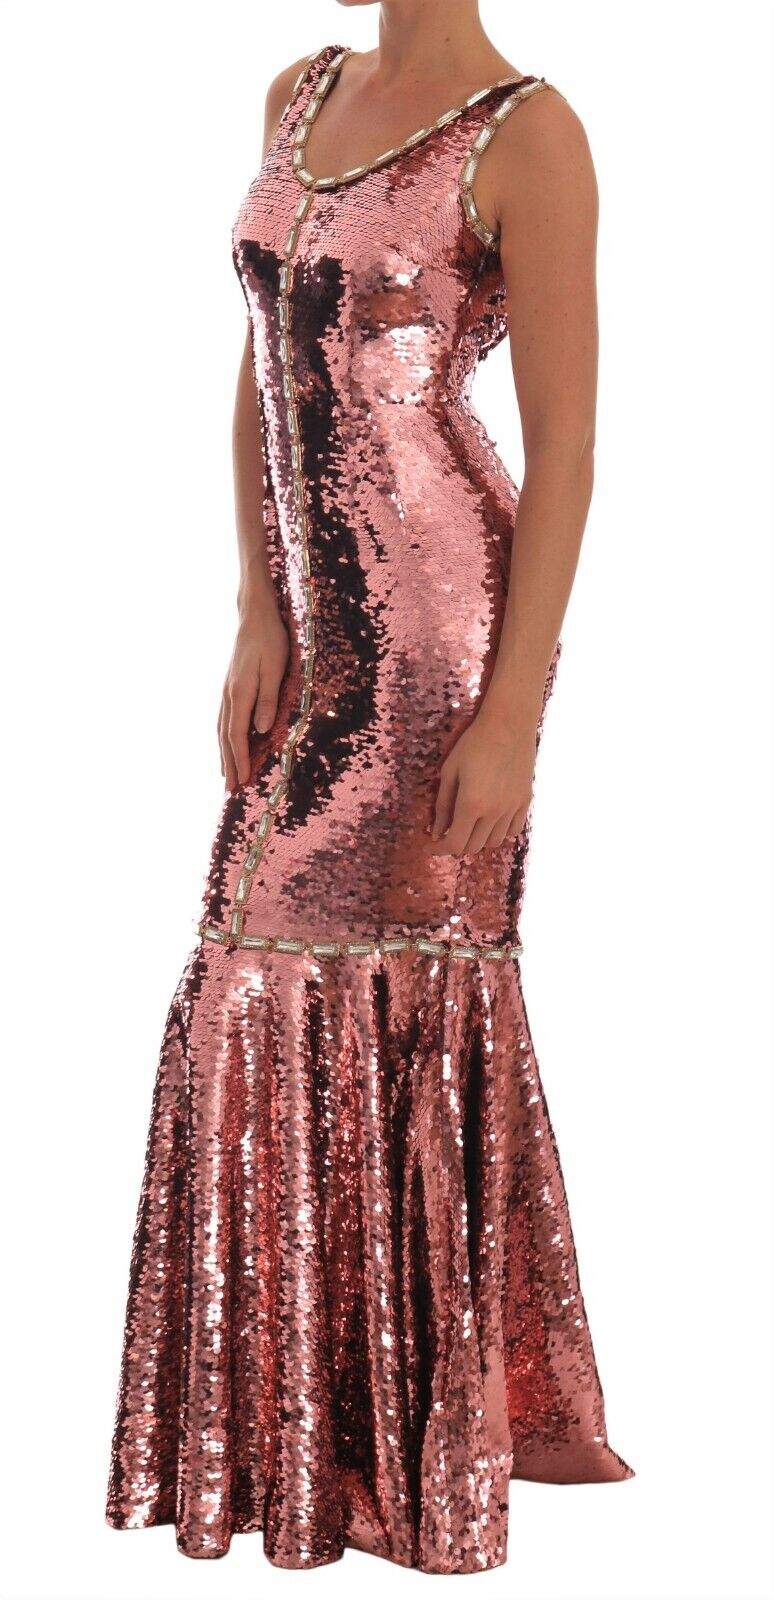 Dolce & Gabbana Pink Sequined Sheath Crystal Dress Gown Dolce & Gabbana, Dresses - Women - Clothing, feed-agegroup-adult, feed-color-Pink, feed-gender-female, IT40|S, Pink at SEYMAYKA